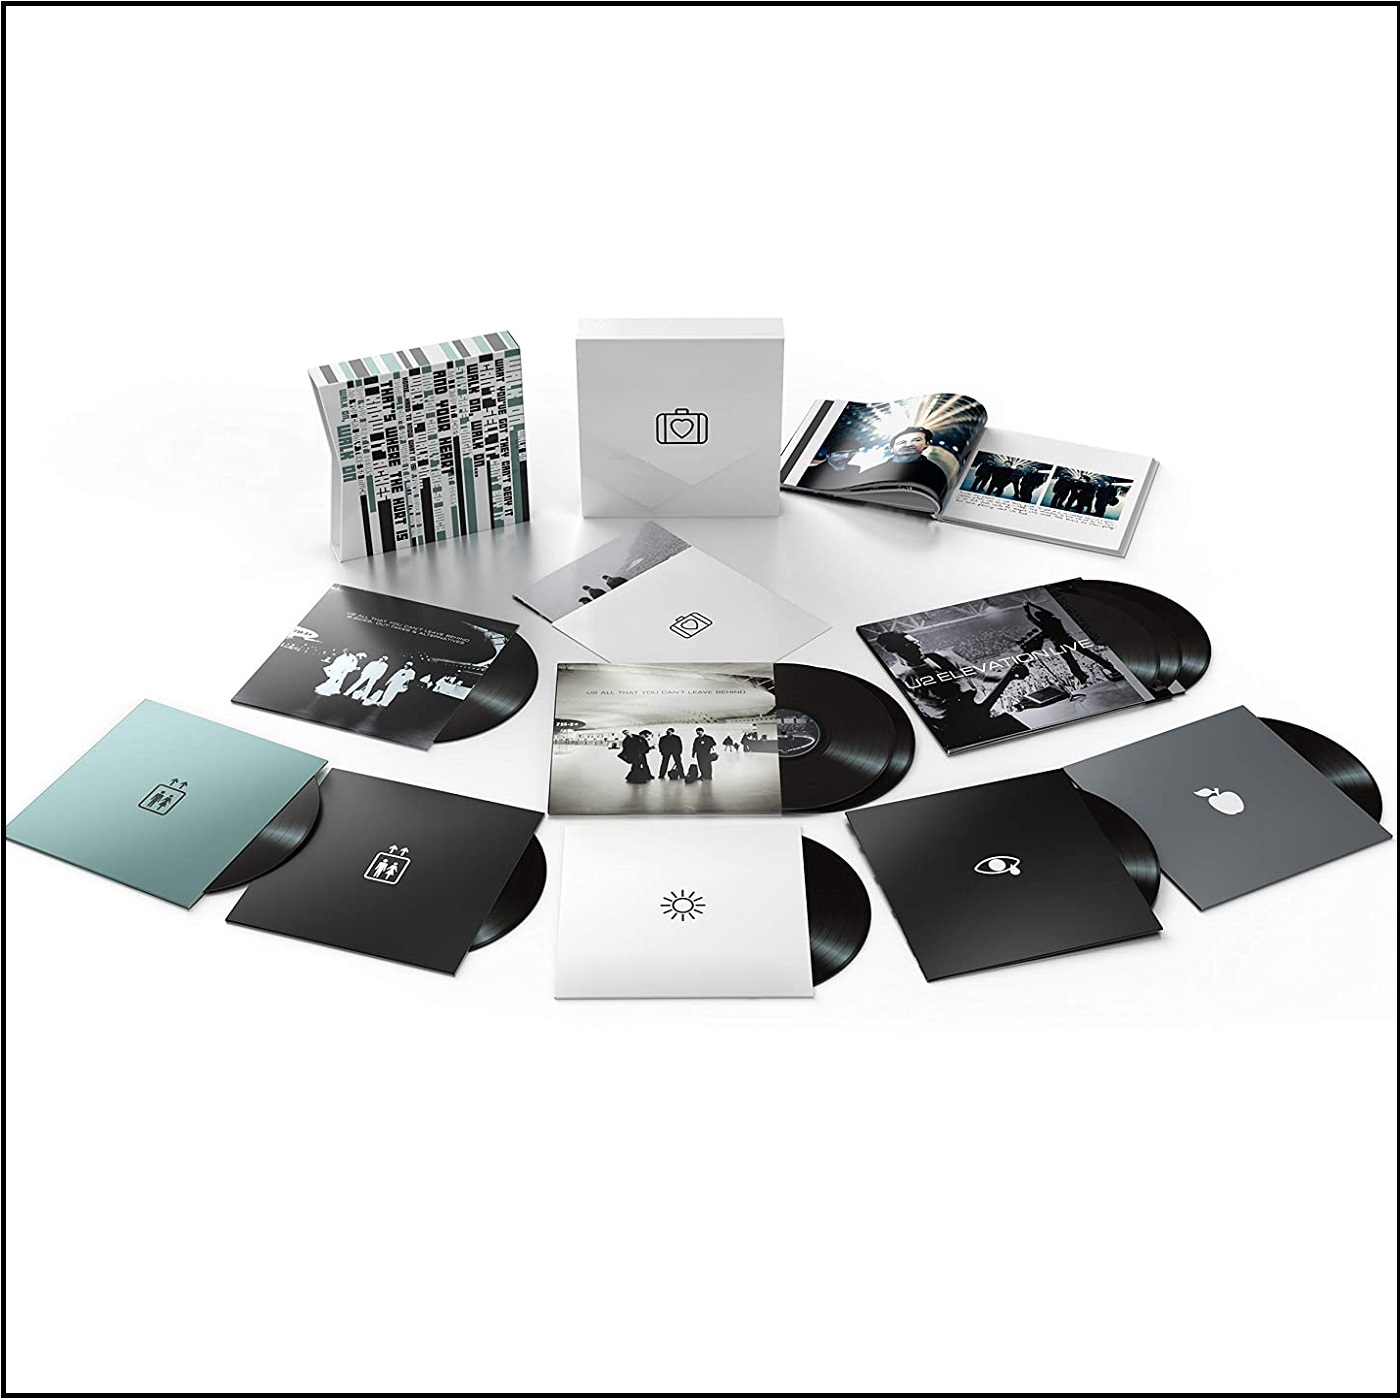 U2 All That You Can’t Leave Behind (Super Deluxe Box)